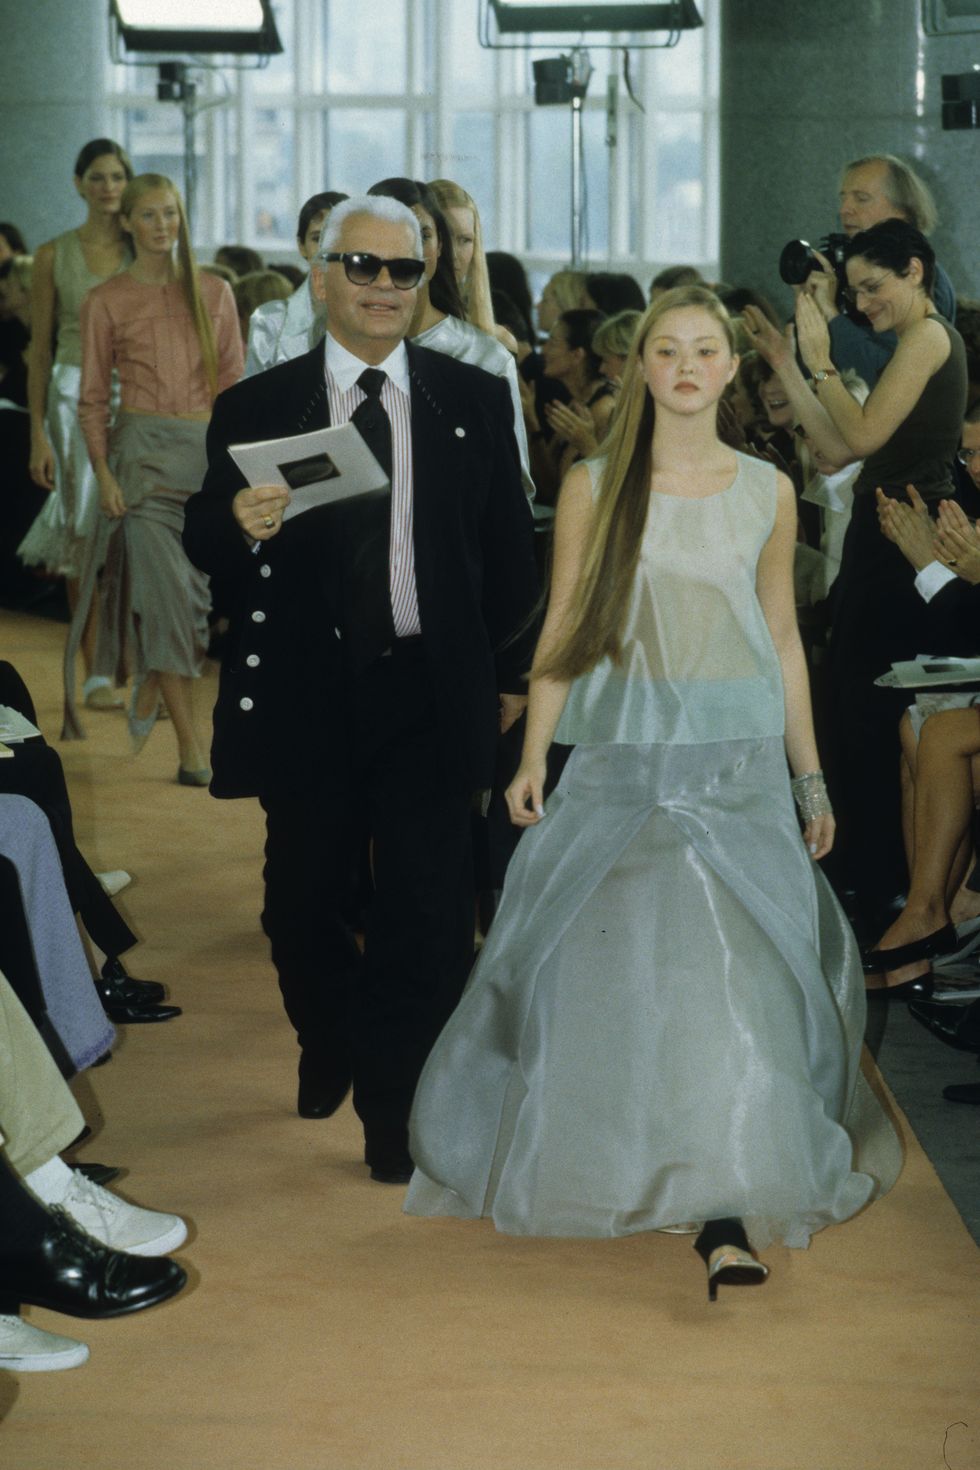 model walks down runway for chanel spring 1999 rtw designs by karl lagerfeld photo by fairchild archivepenske media via getty images